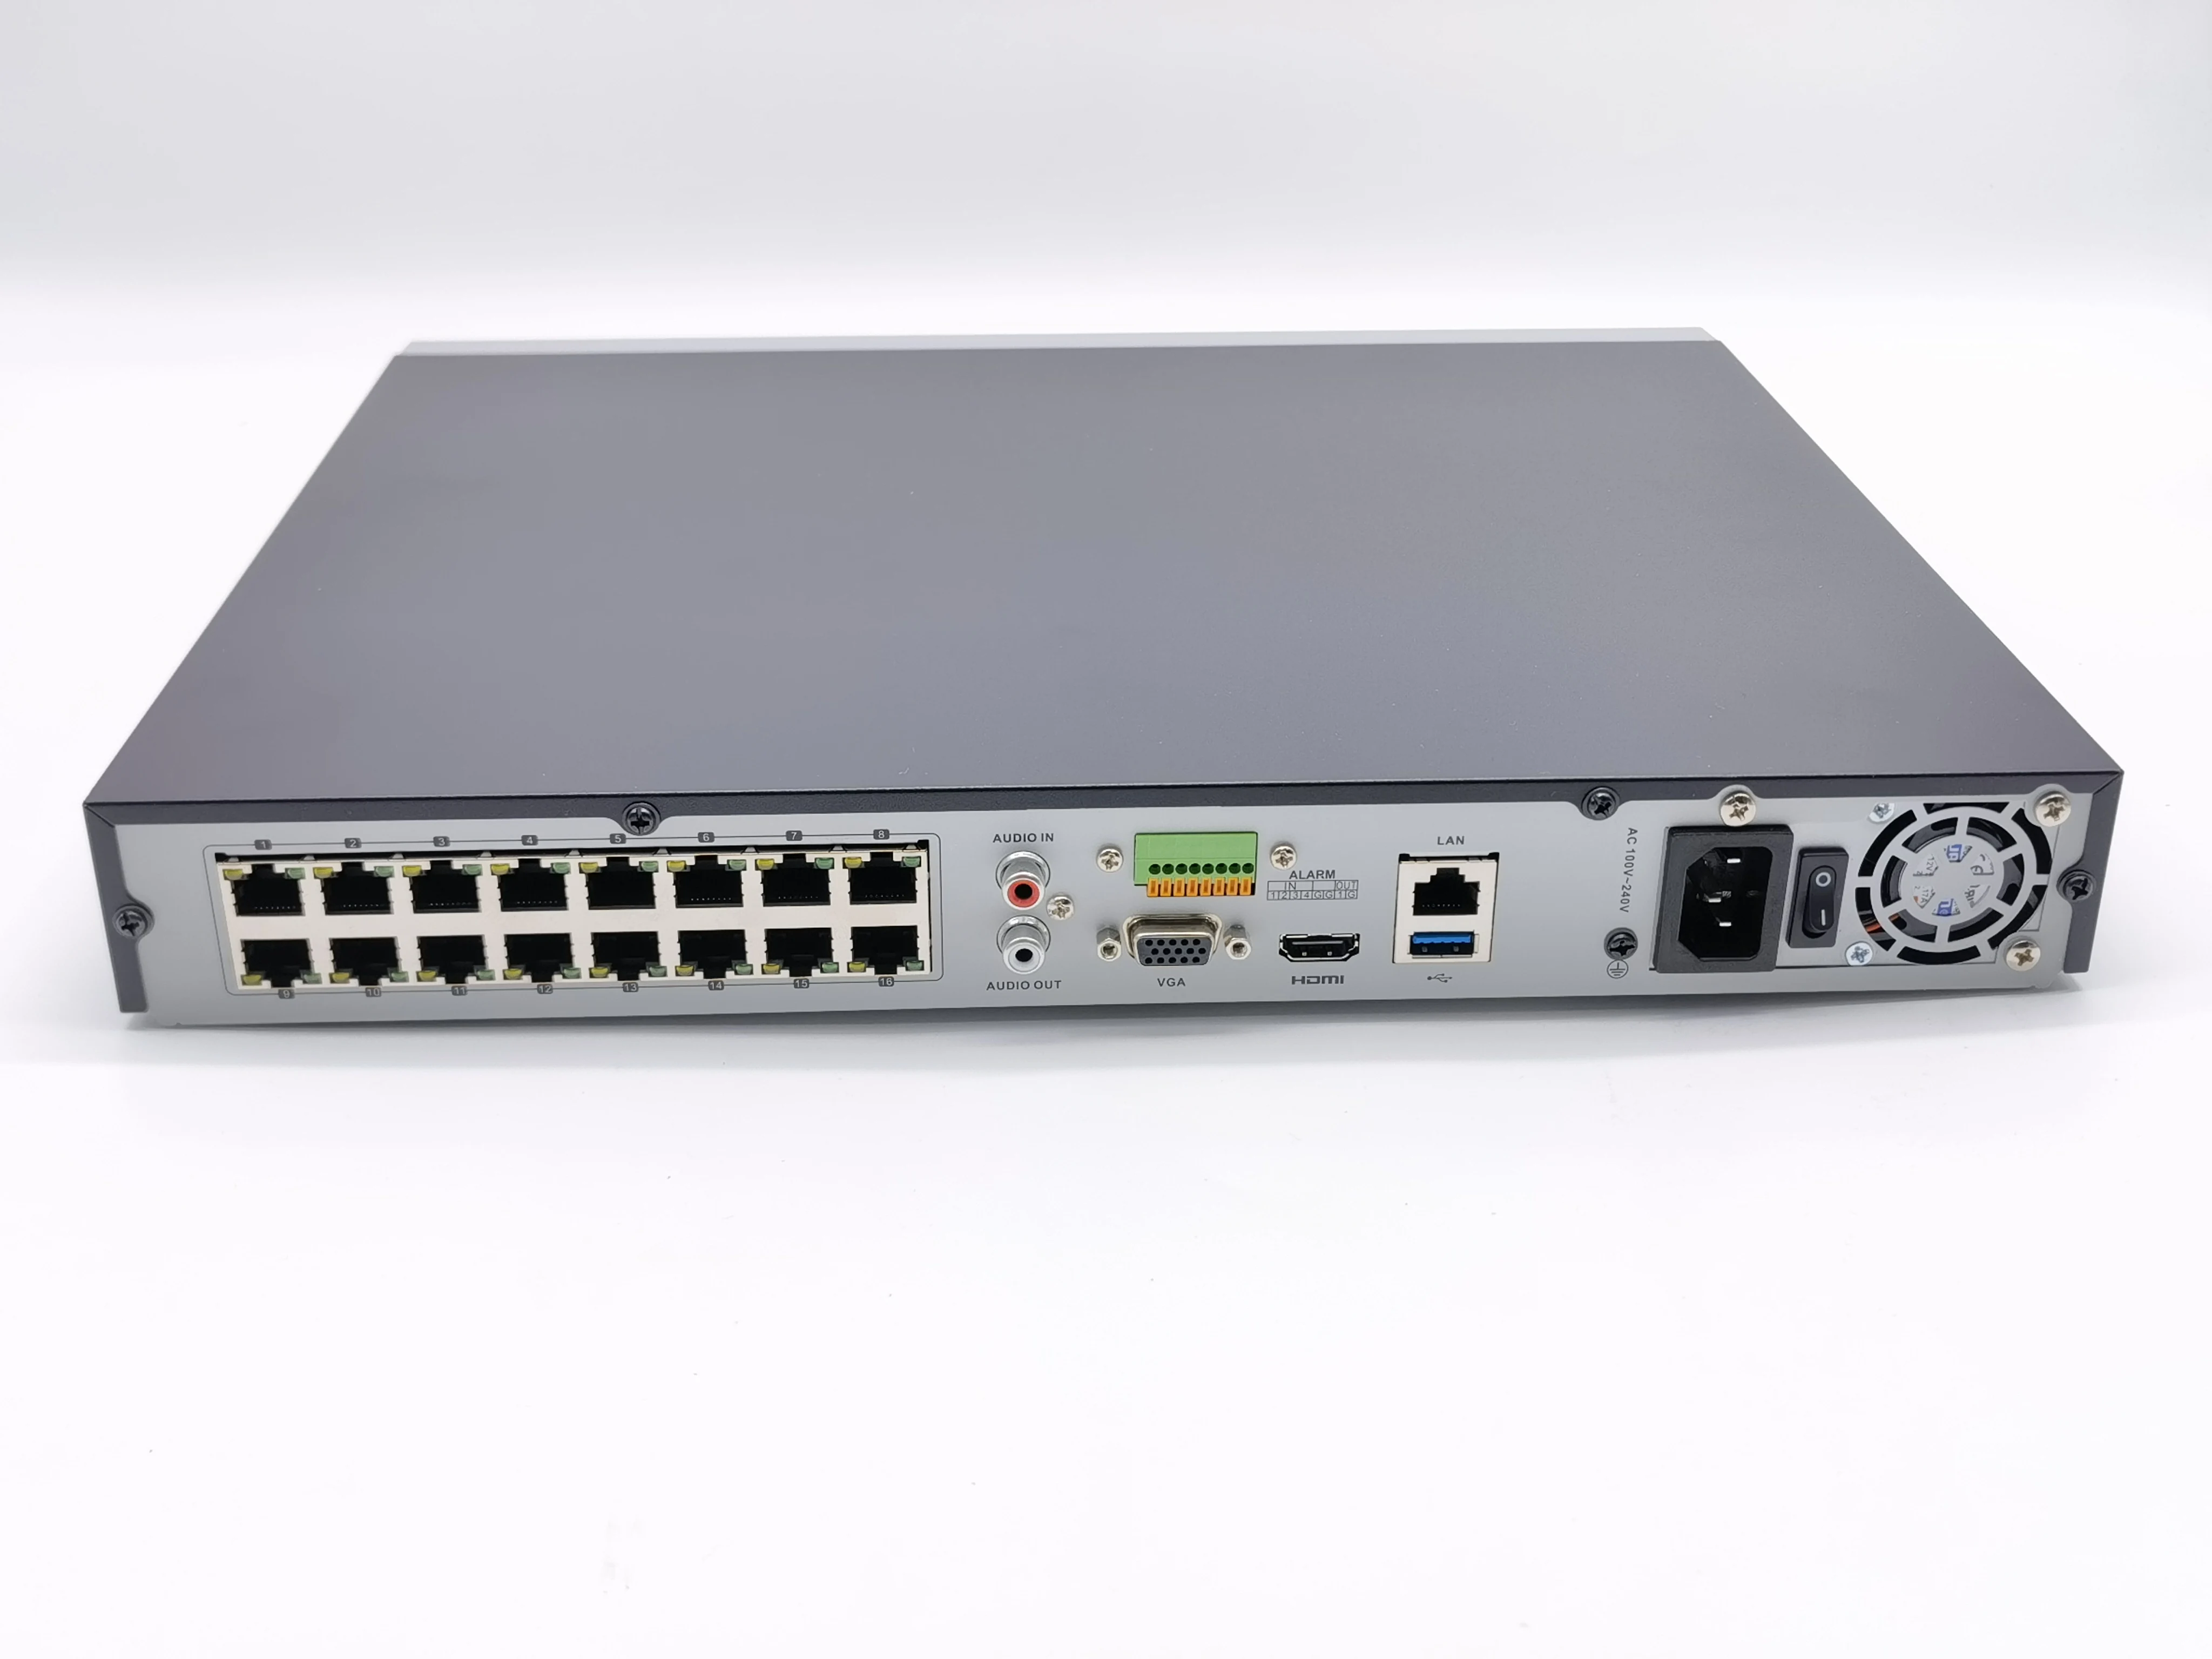 

DS-7616NI-K2/16P HK original 16 channel POE NVR 4K H.265 with 16 PoE Ports 1U 2 HDDs for continuous video recording